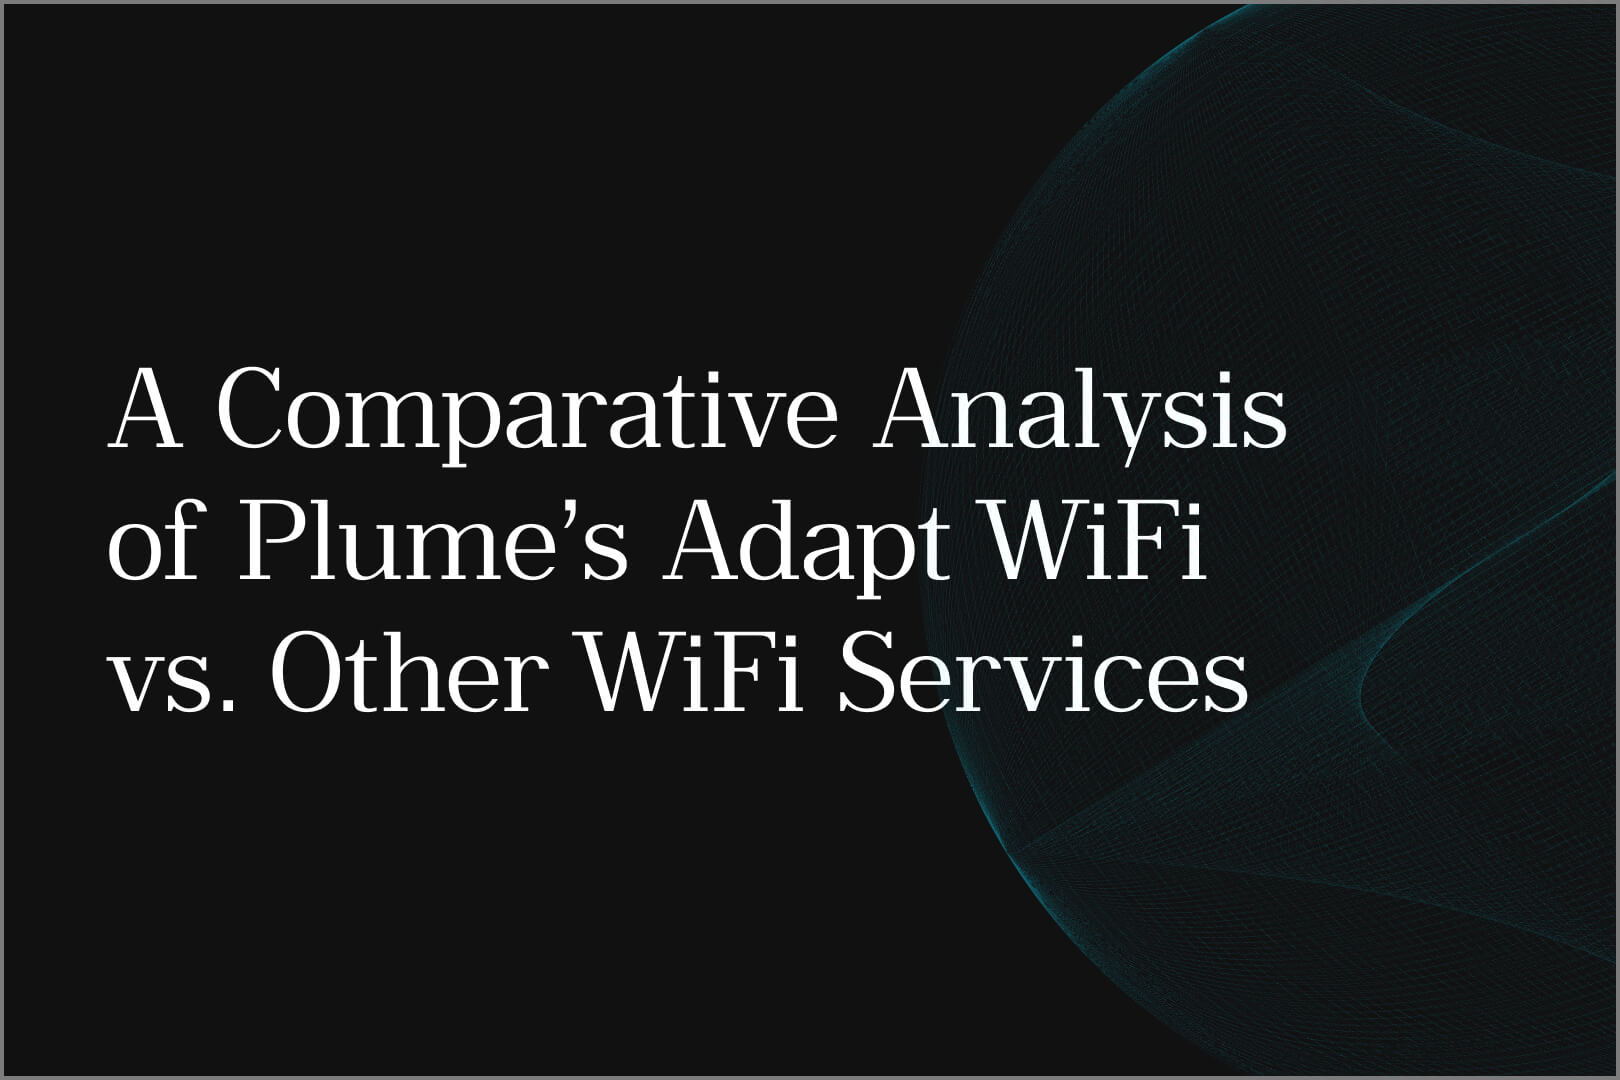 A comparative analysis of Plume’s Adapt WiFi vs. other WiFi services